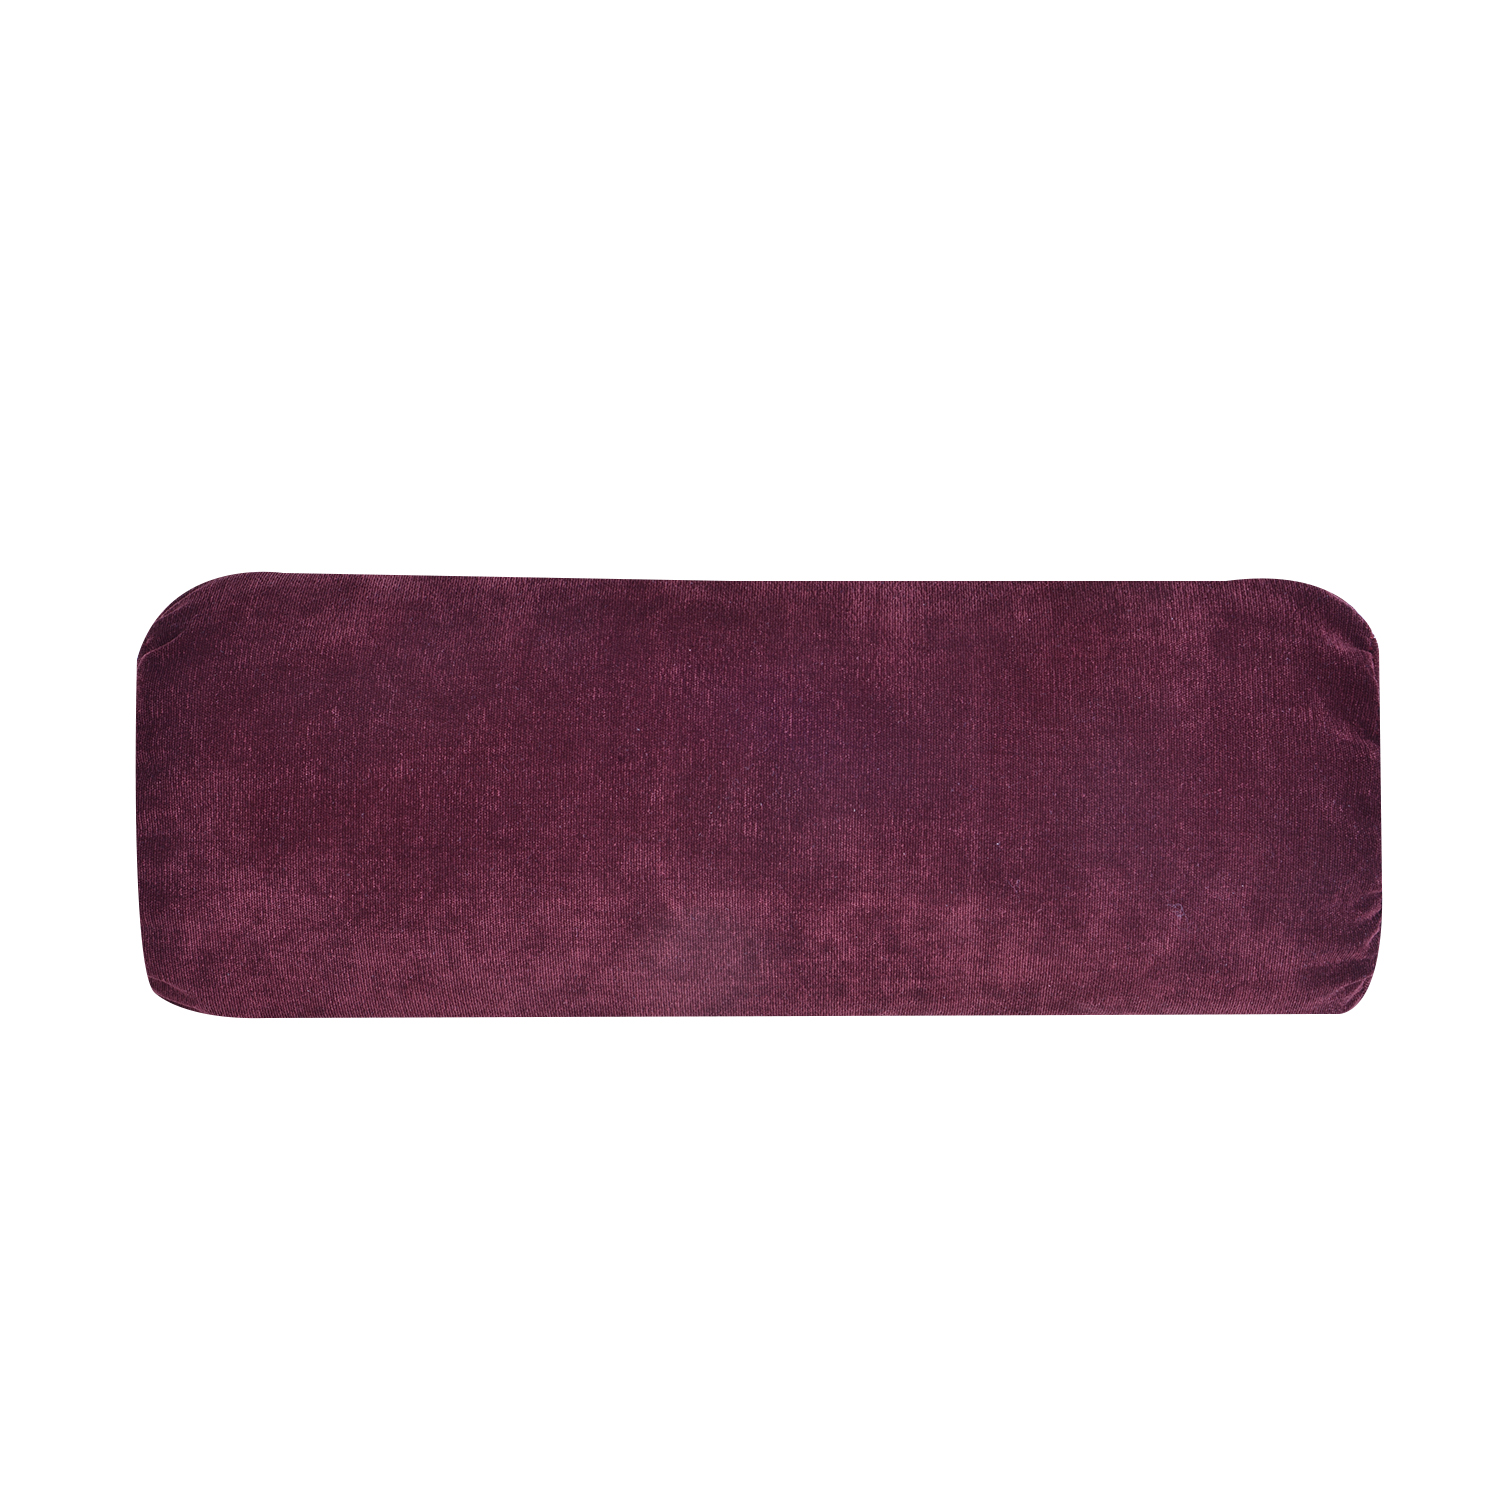 Lounge Sofa With Two Pillows - WF195034AAD